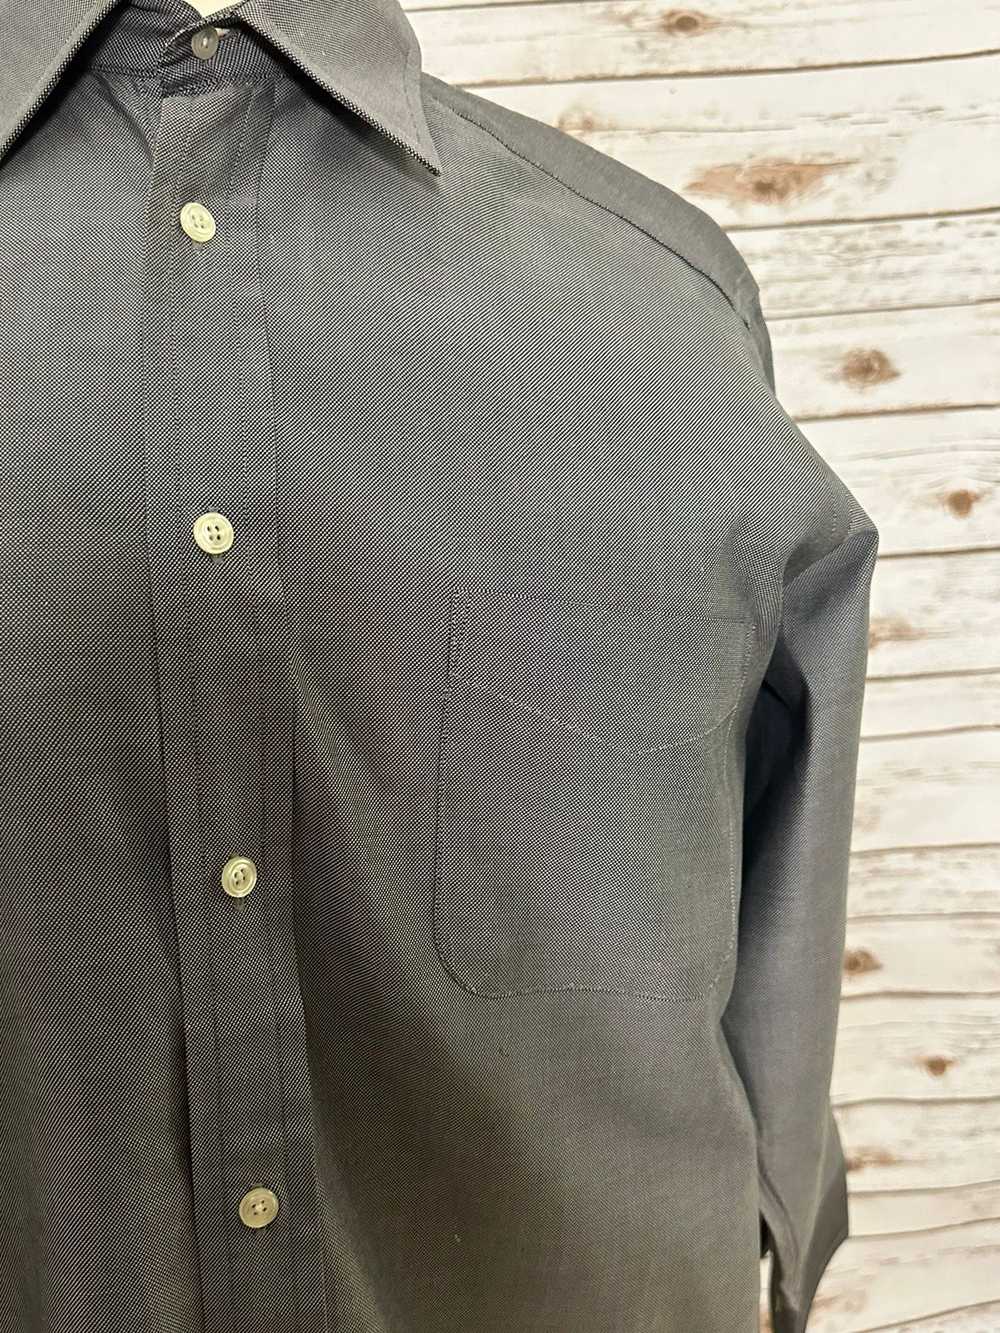 Faconnable Faconnable button-down shirt - image 3